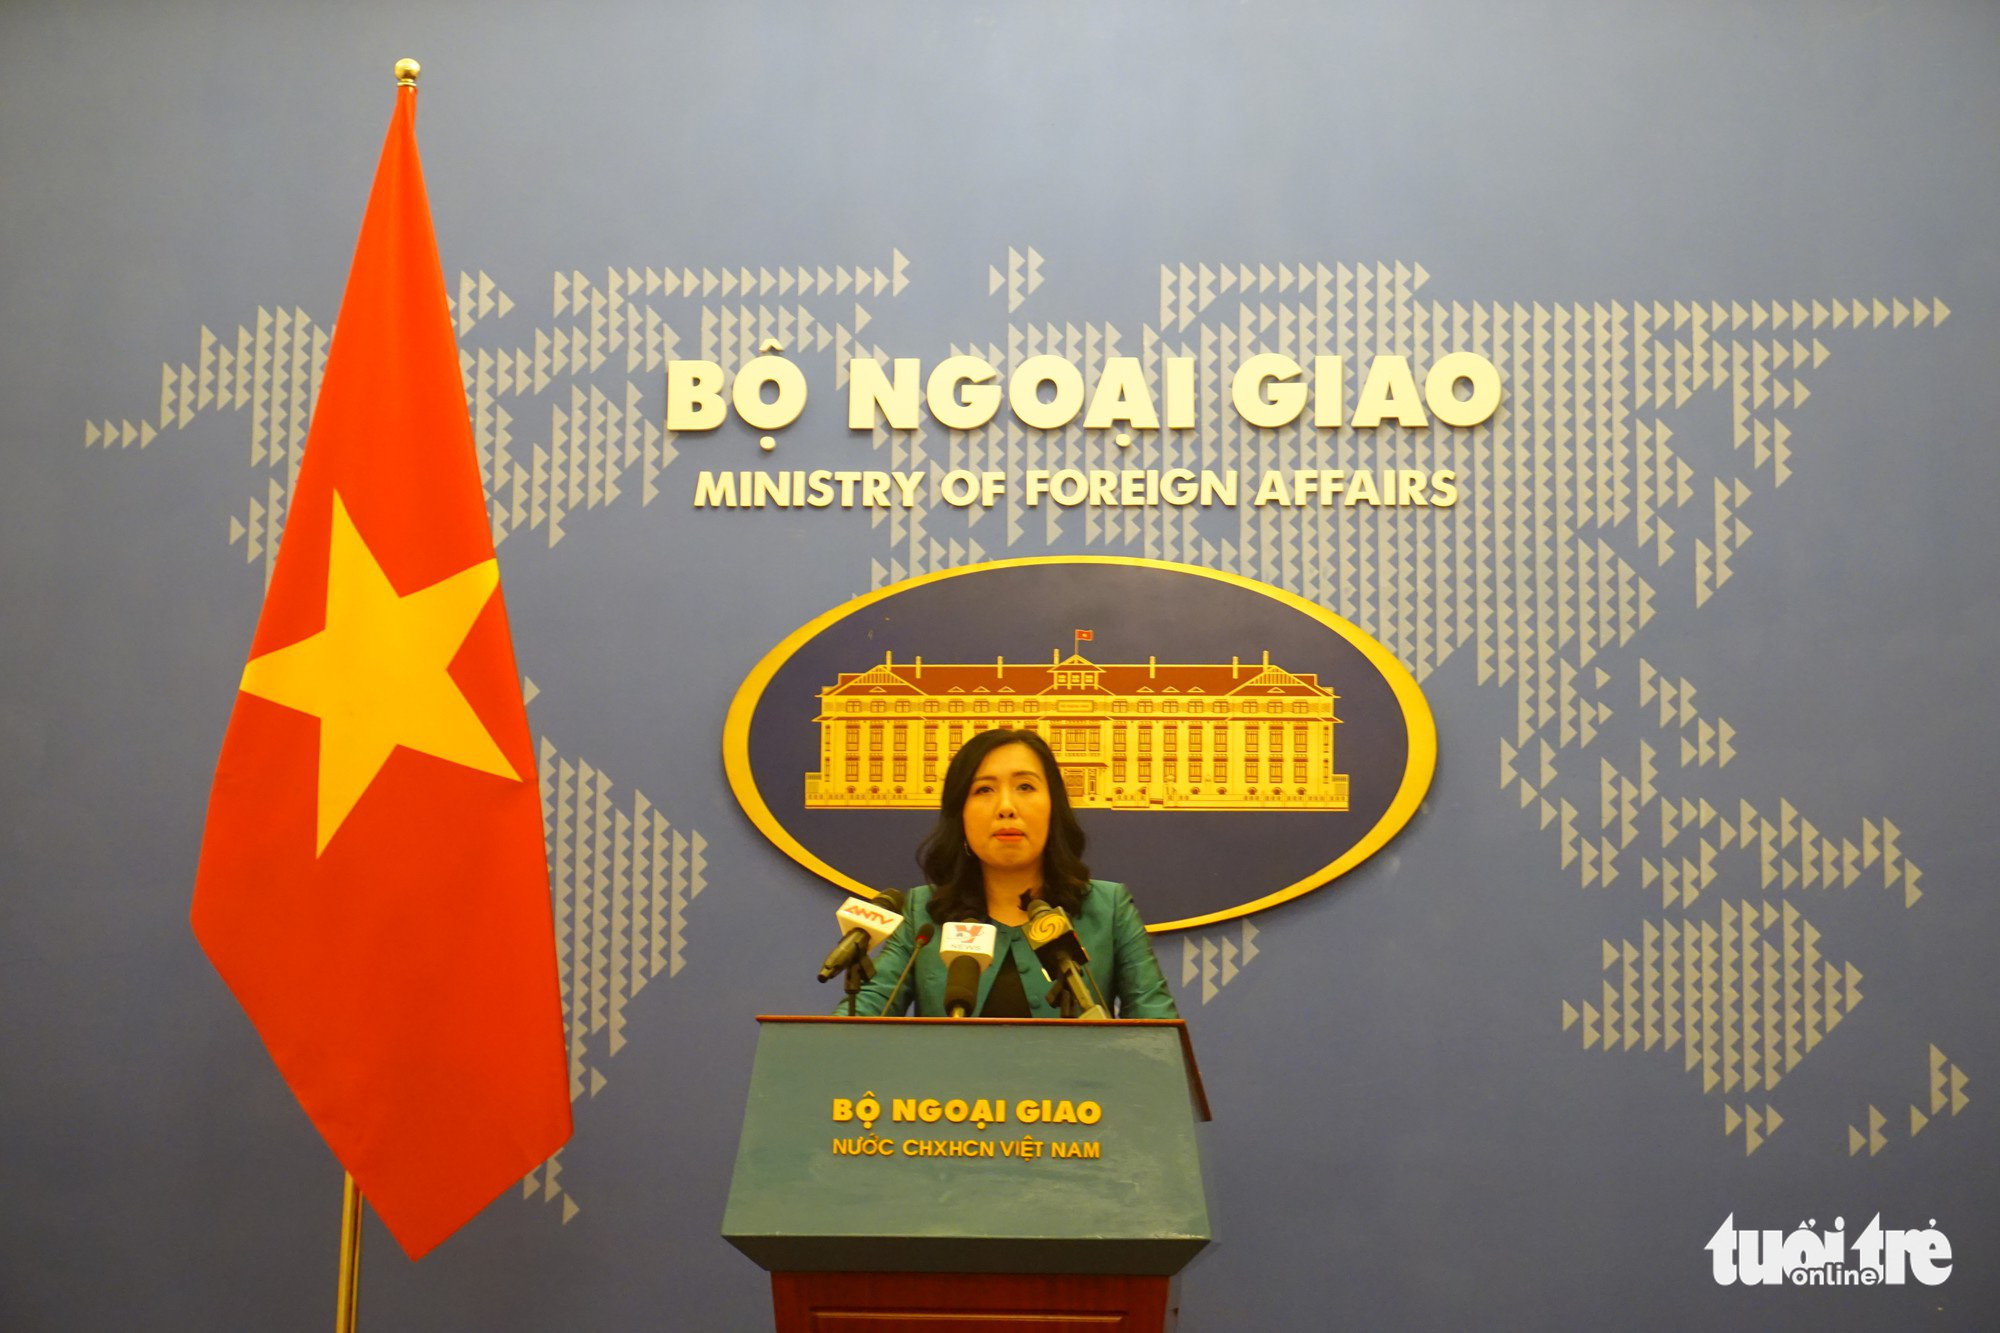 Vietnam welcomes countries’ East Vietnam Sea stances in line with international law